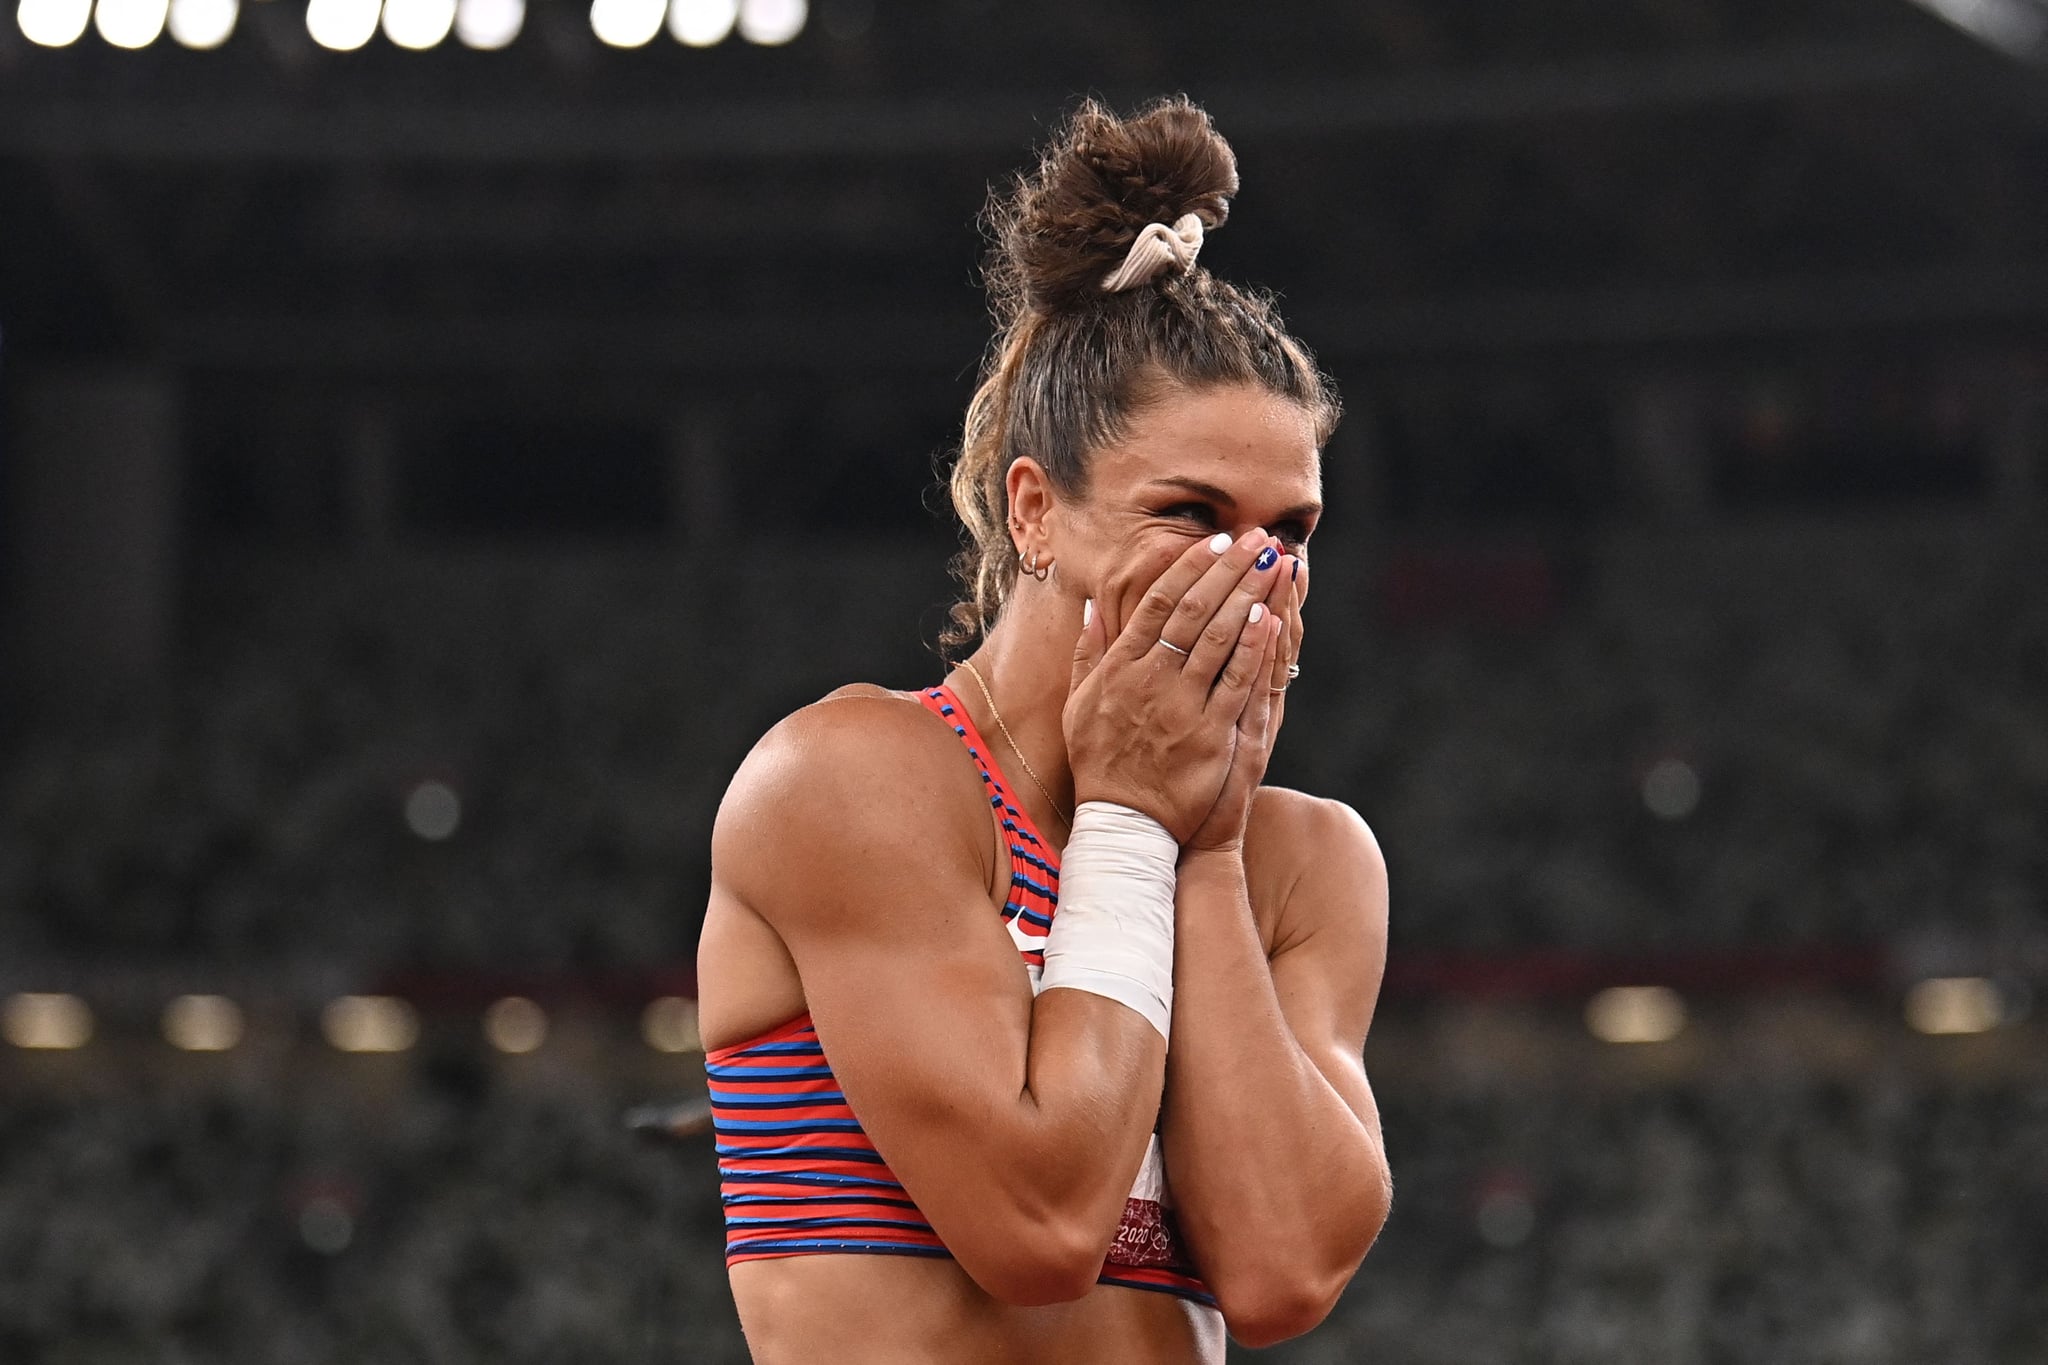 USA's Valarie Allman reacts during the women's discus throw final during the Tokyo 2020 Olympic Games at the Olympic Stadium in Tokyo on August 2, 2021. (Photo by Ben STANSALL / AFP) (Photo by BEN STANSALL/AFP via Getty Images)